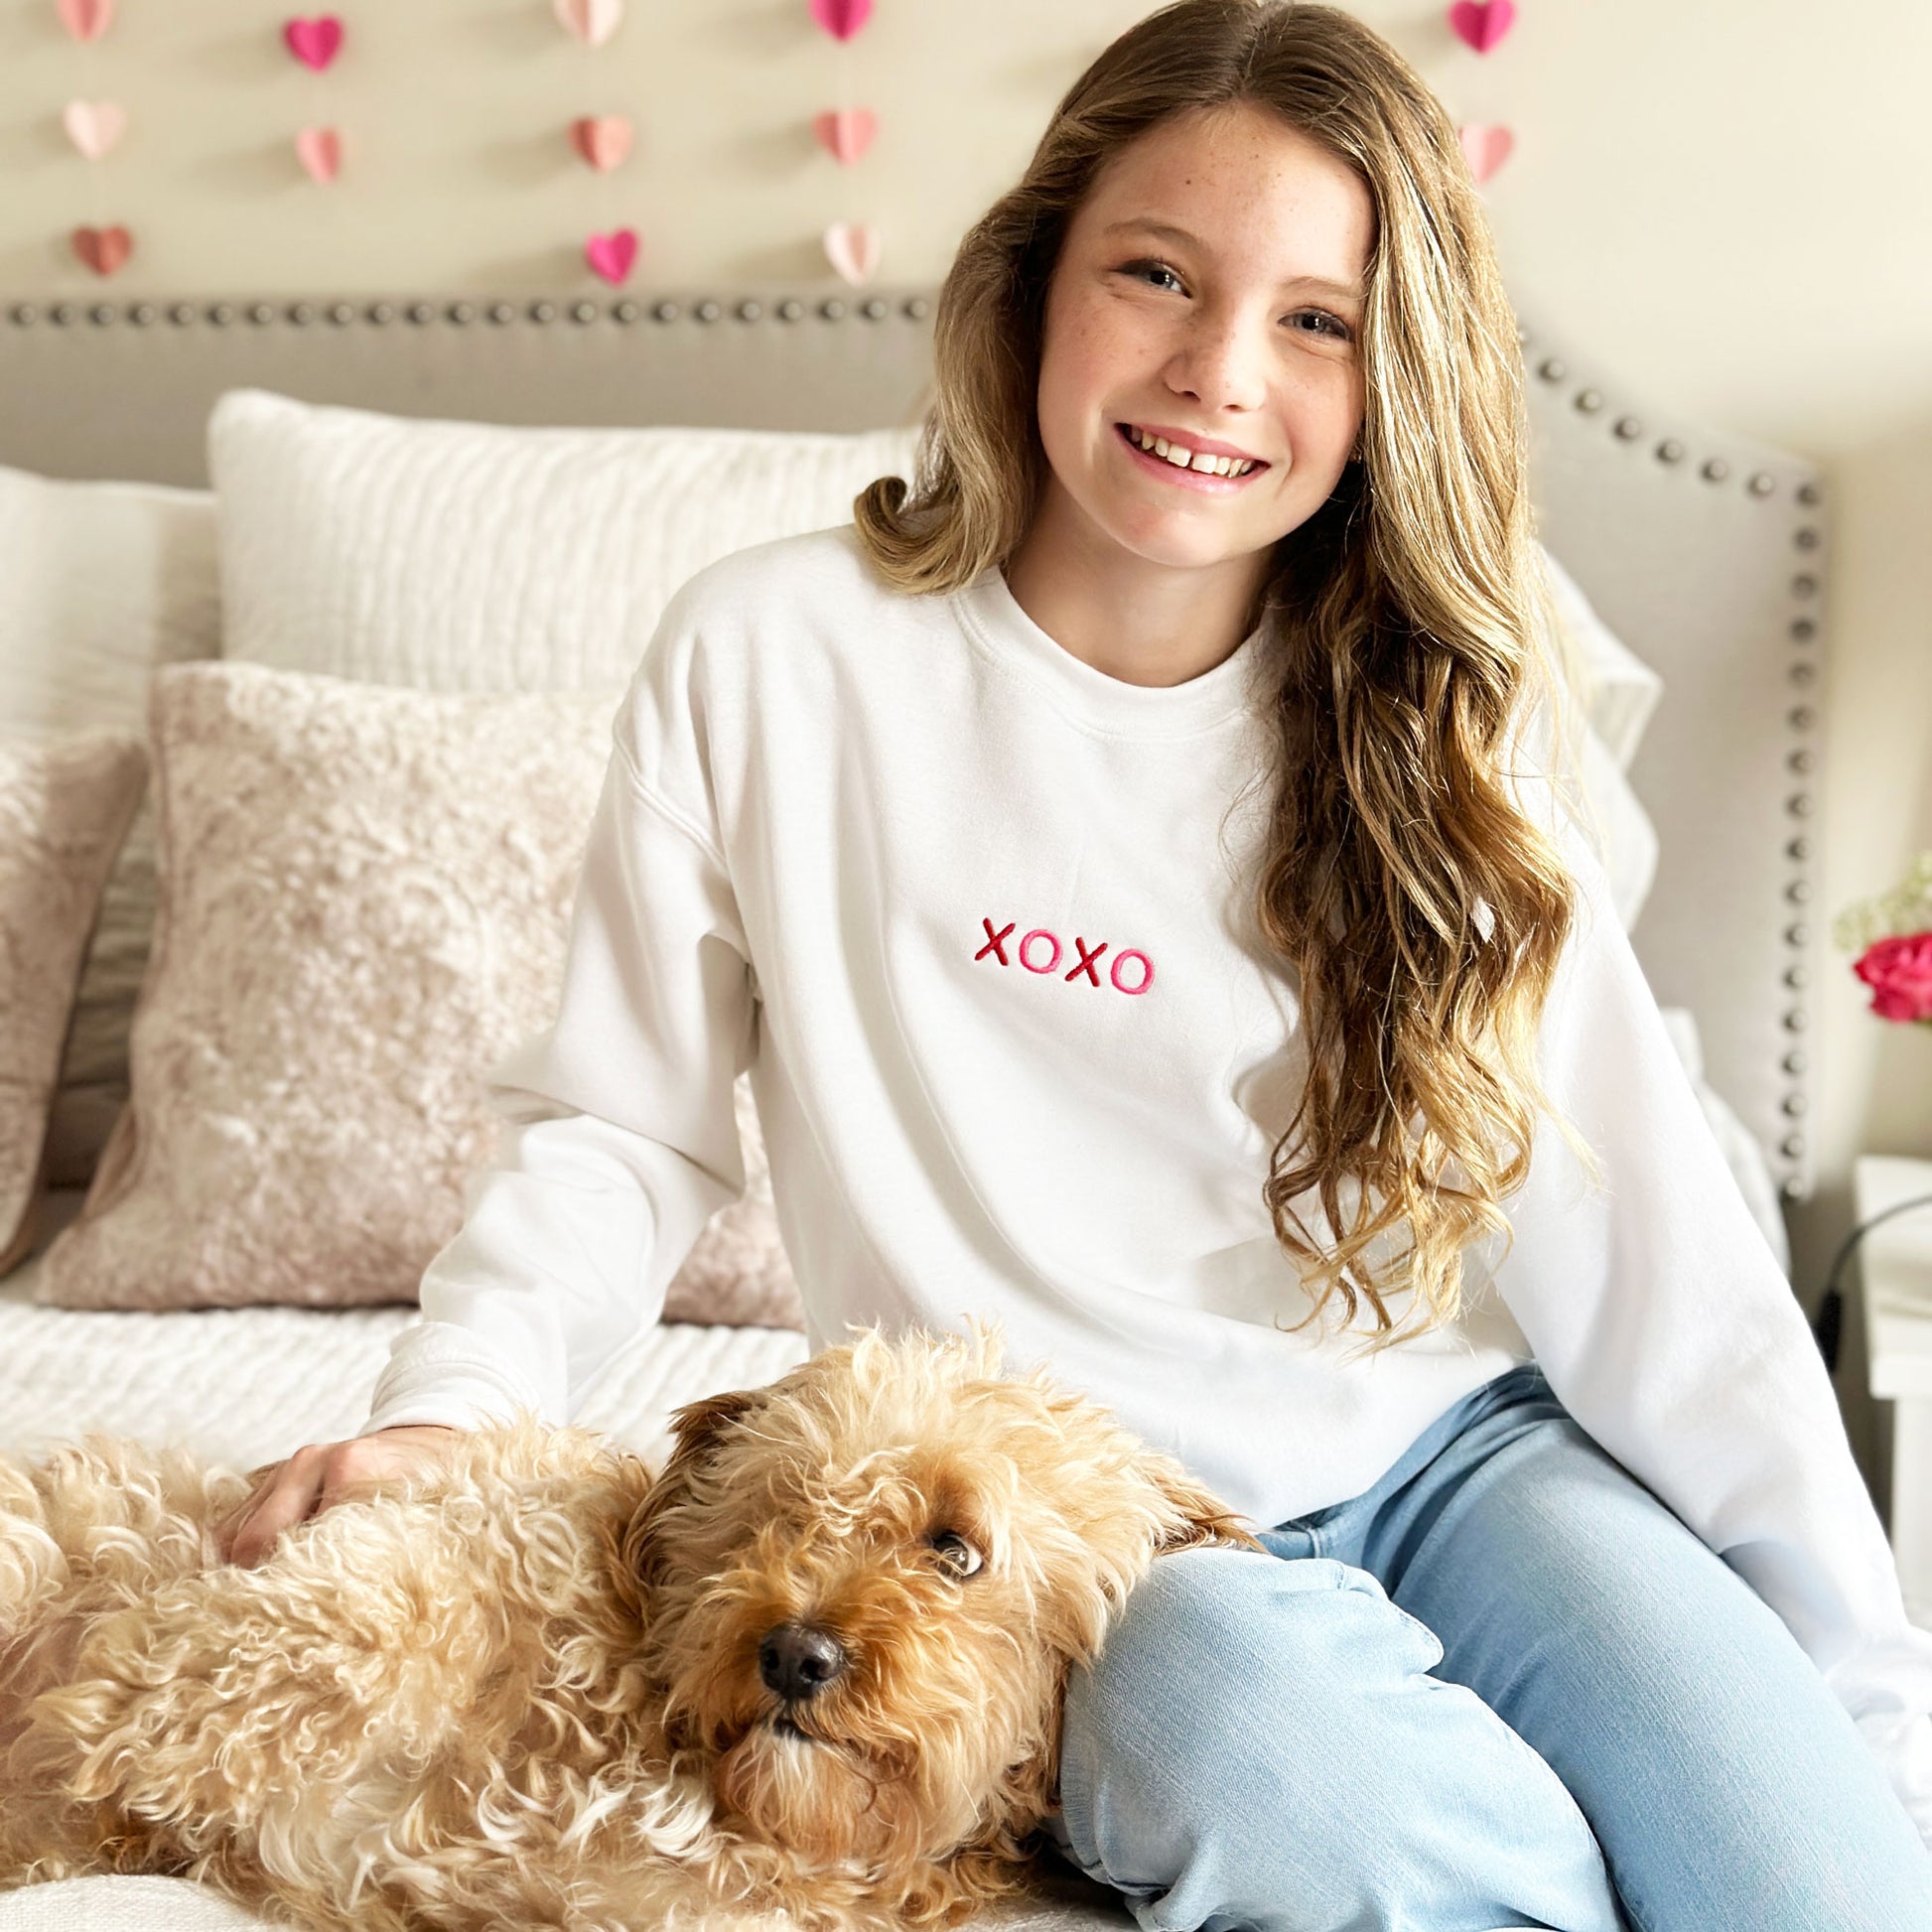 girl with her dog wearing a cute an festive white sweatshirt with xoxo embroidered on the front